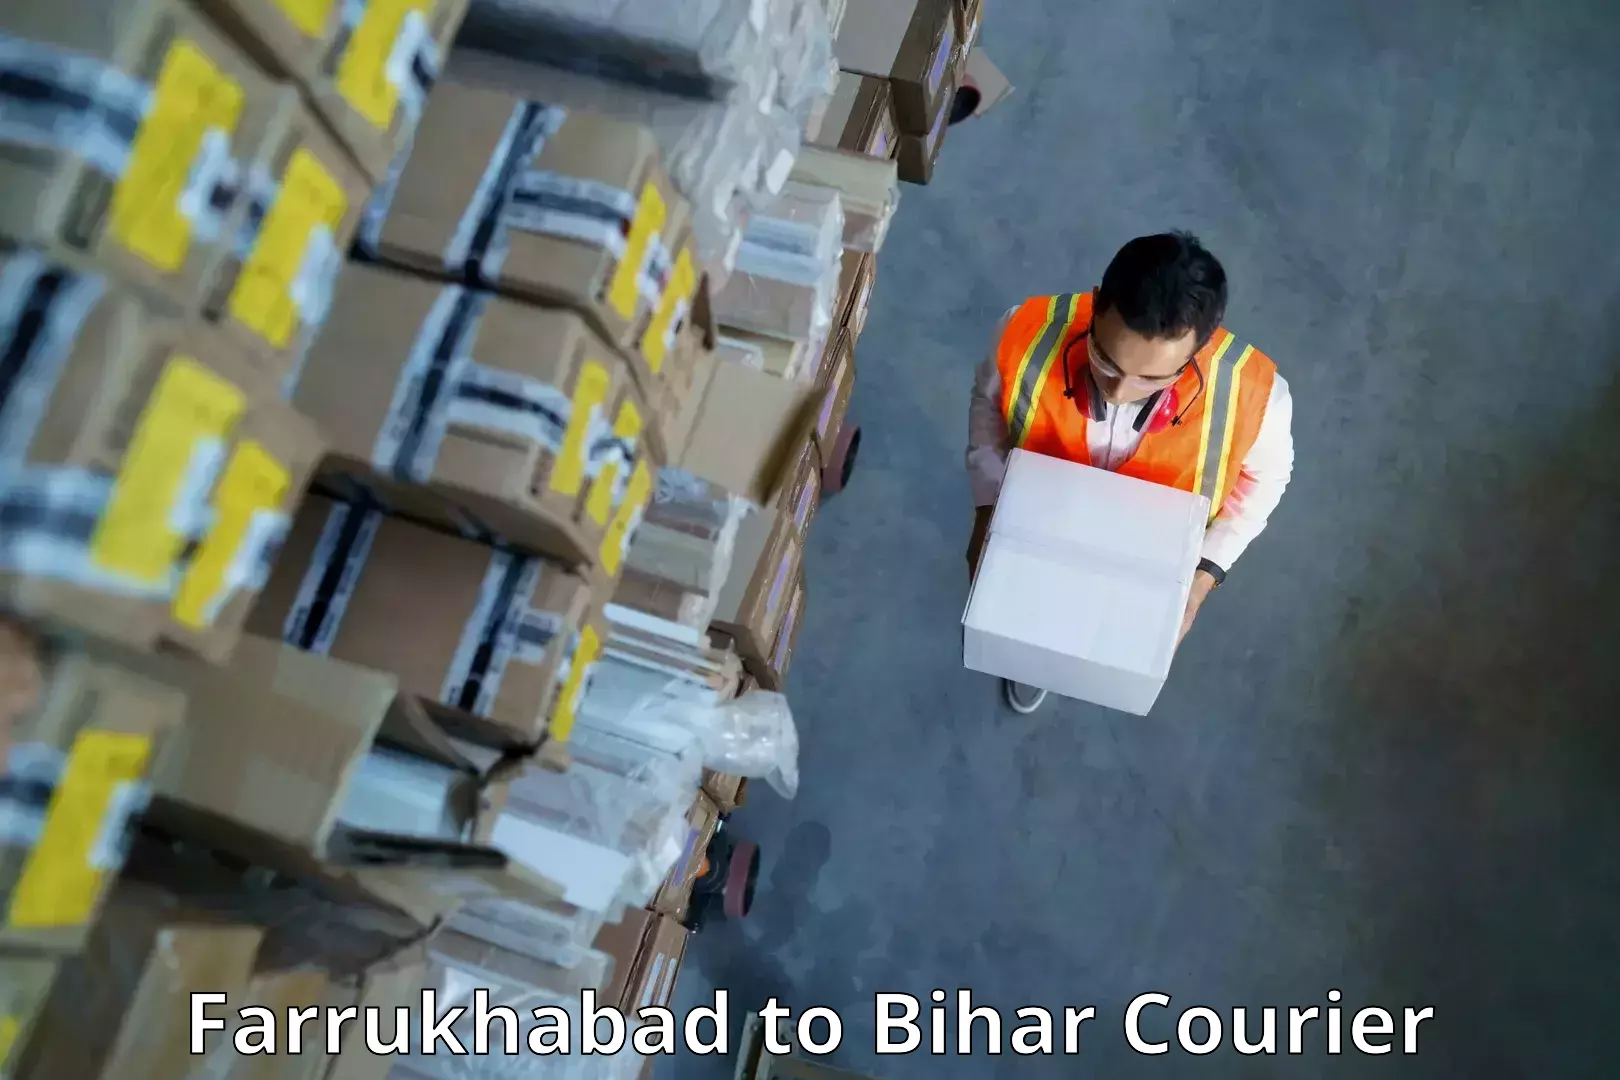 Subscription-based courier Farrukhabad to Sandesh